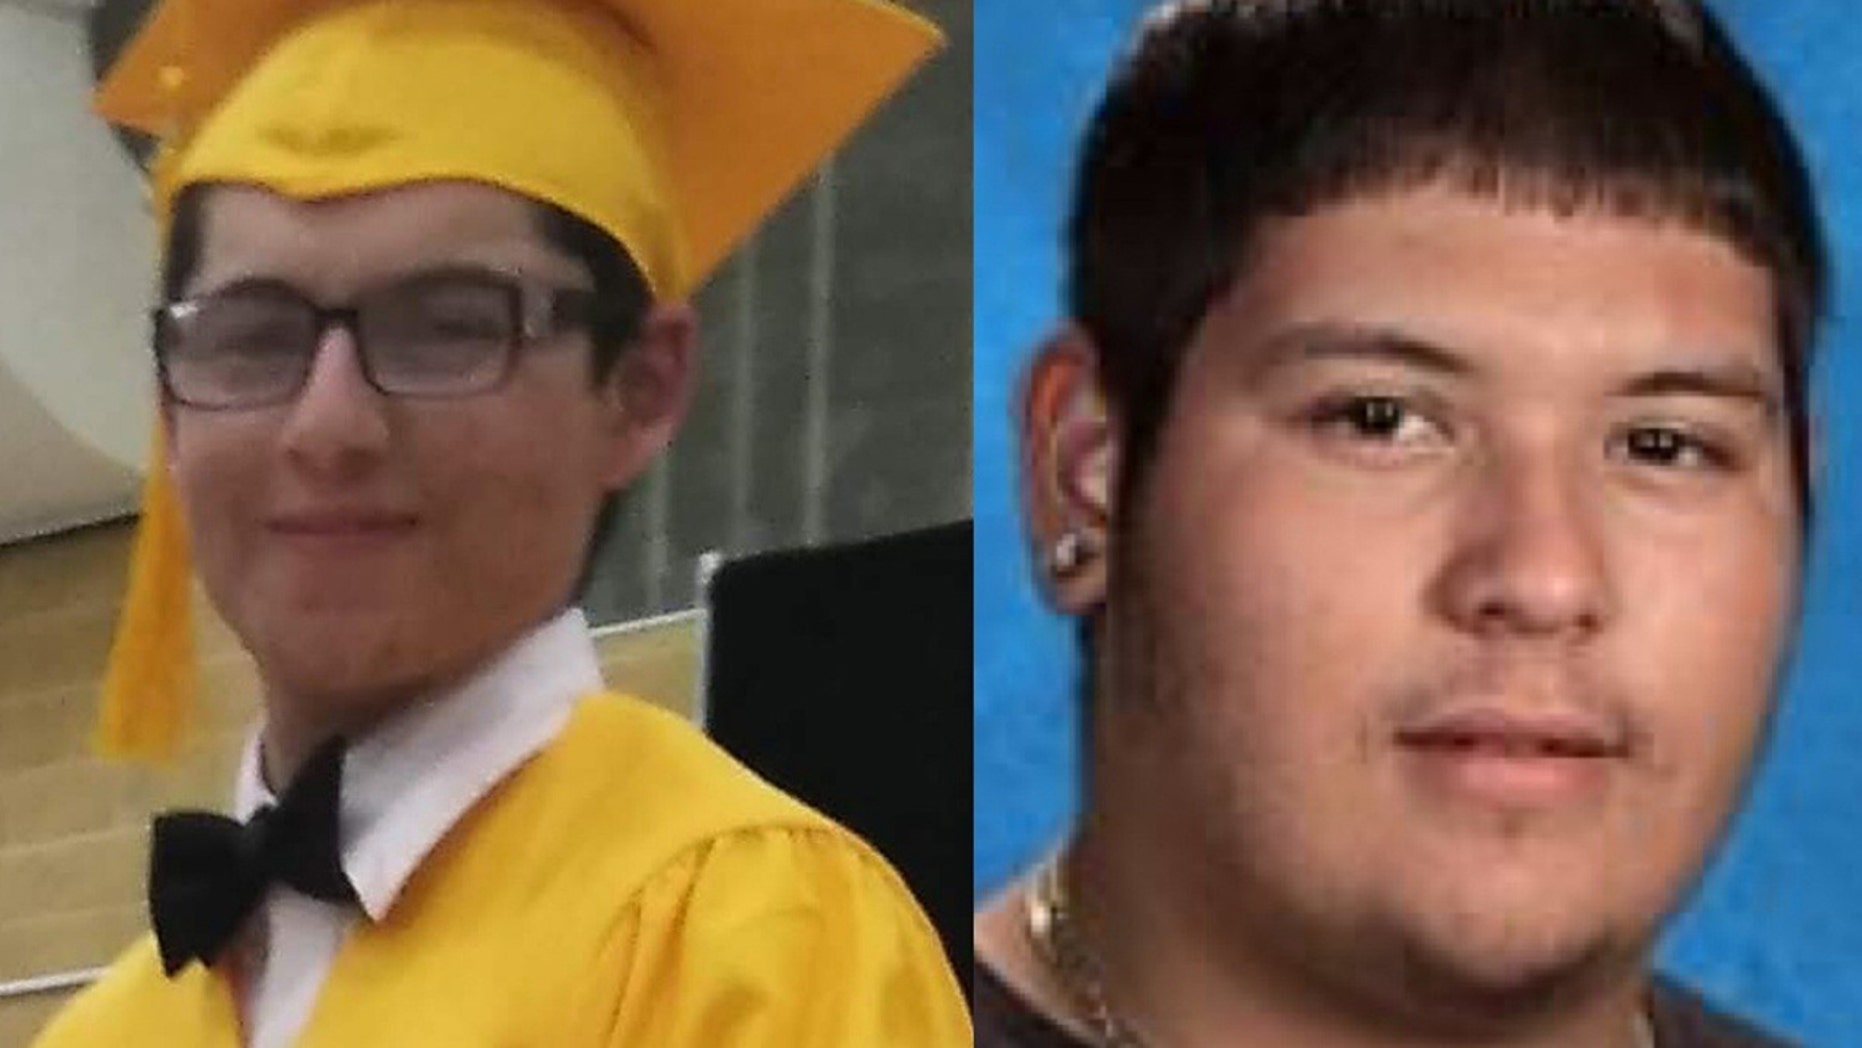 Christopher Alexis Gomez, 17, and Juan Suarez-Ojeda, were reportedly killed execution-style in Mexico.